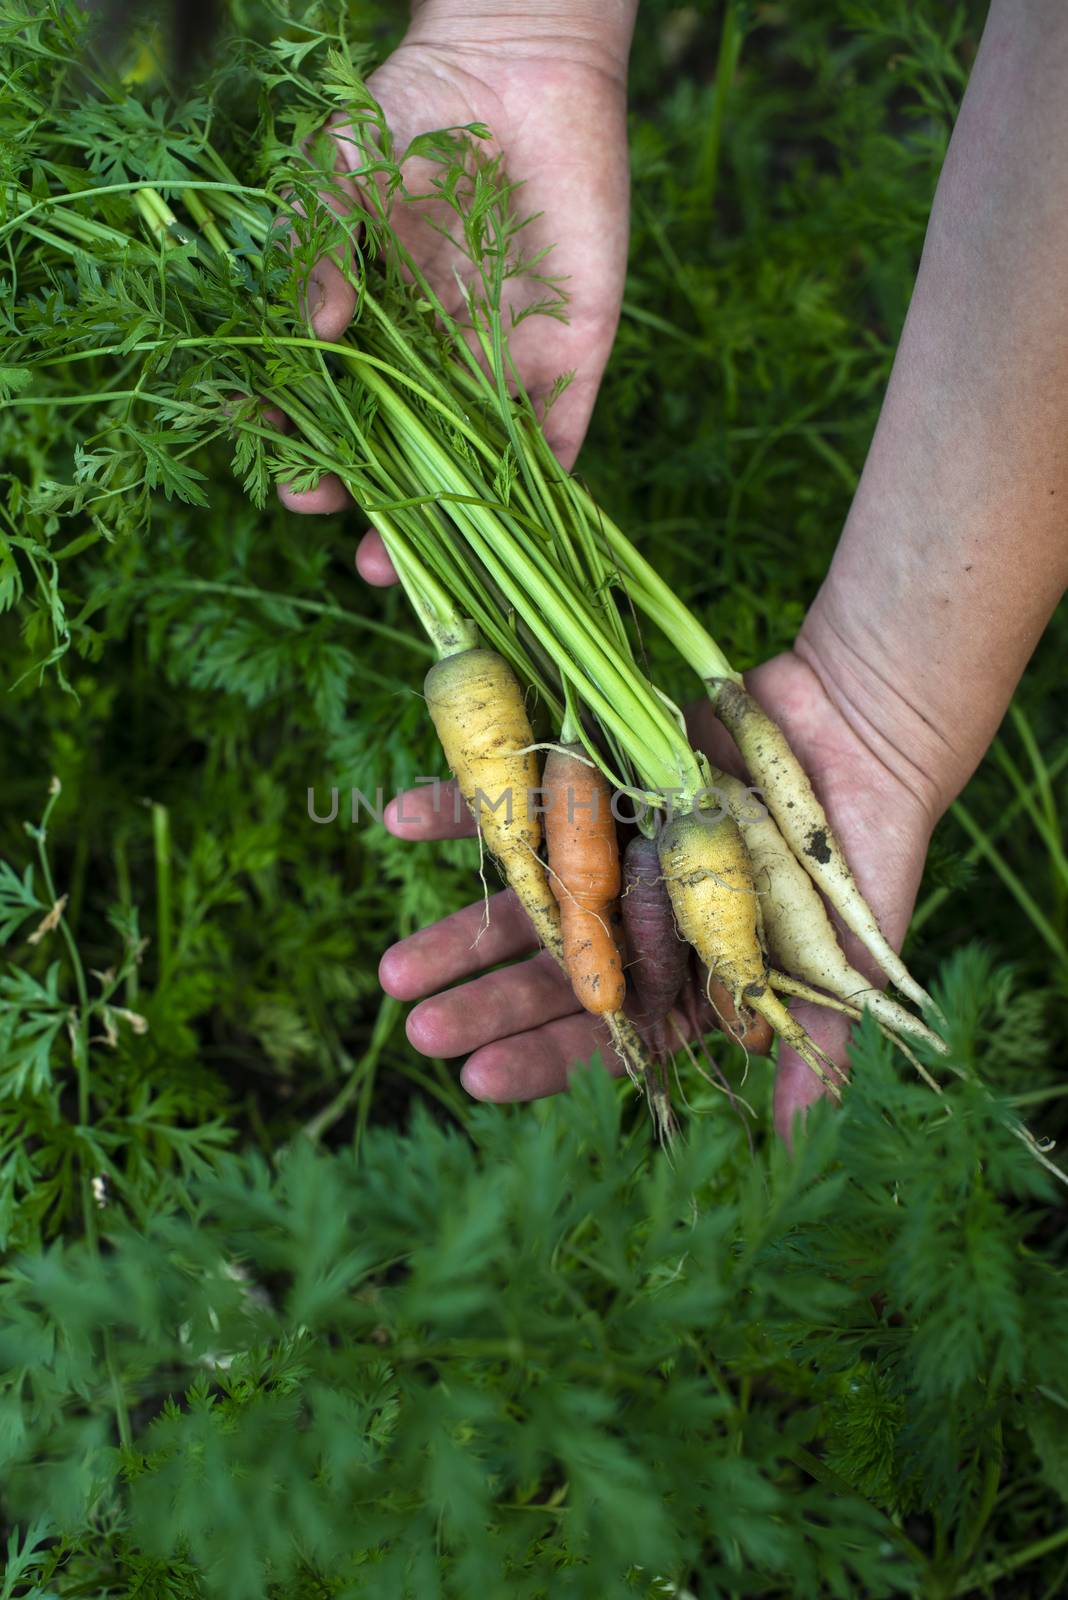 Carrots from small organic farm. Woman farmer hold multi colored carrots in a garden. Concept for bio agriculture.